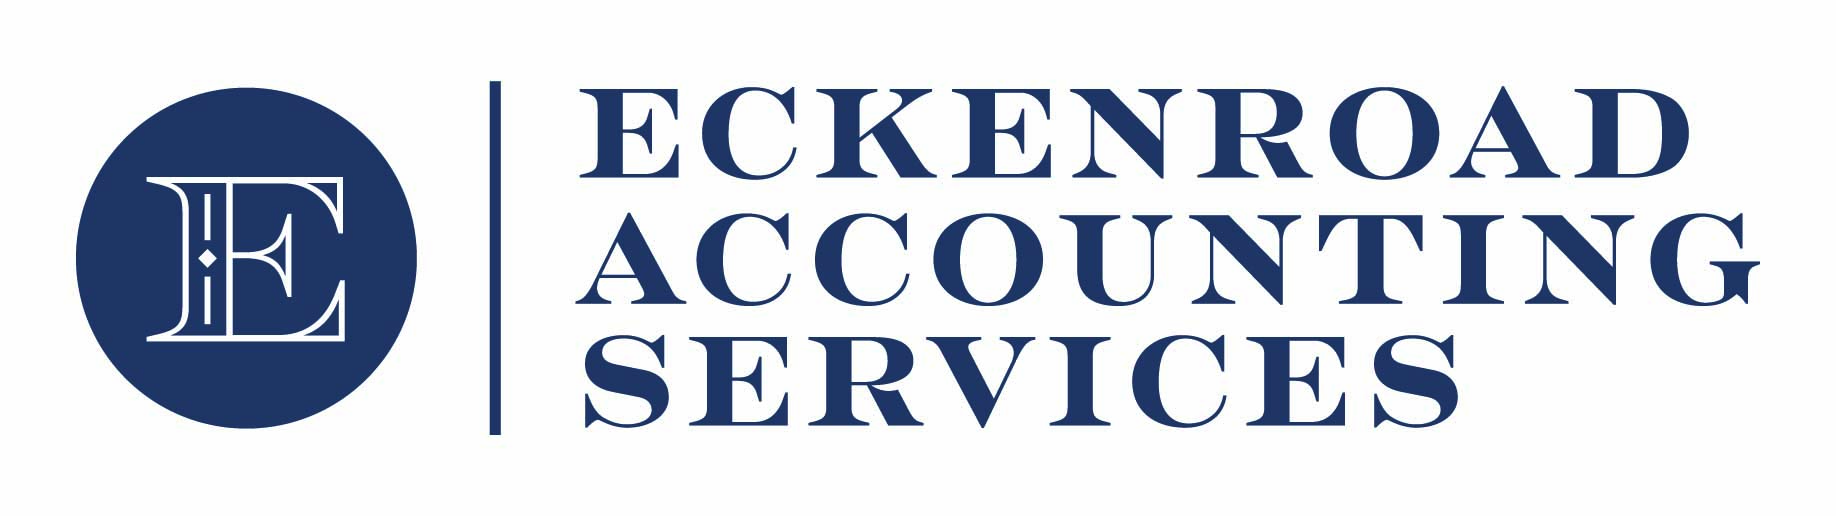 Eckenroad Accounting Services 275 Town Hill Rd, New Enterprise Pennsylvania 16664